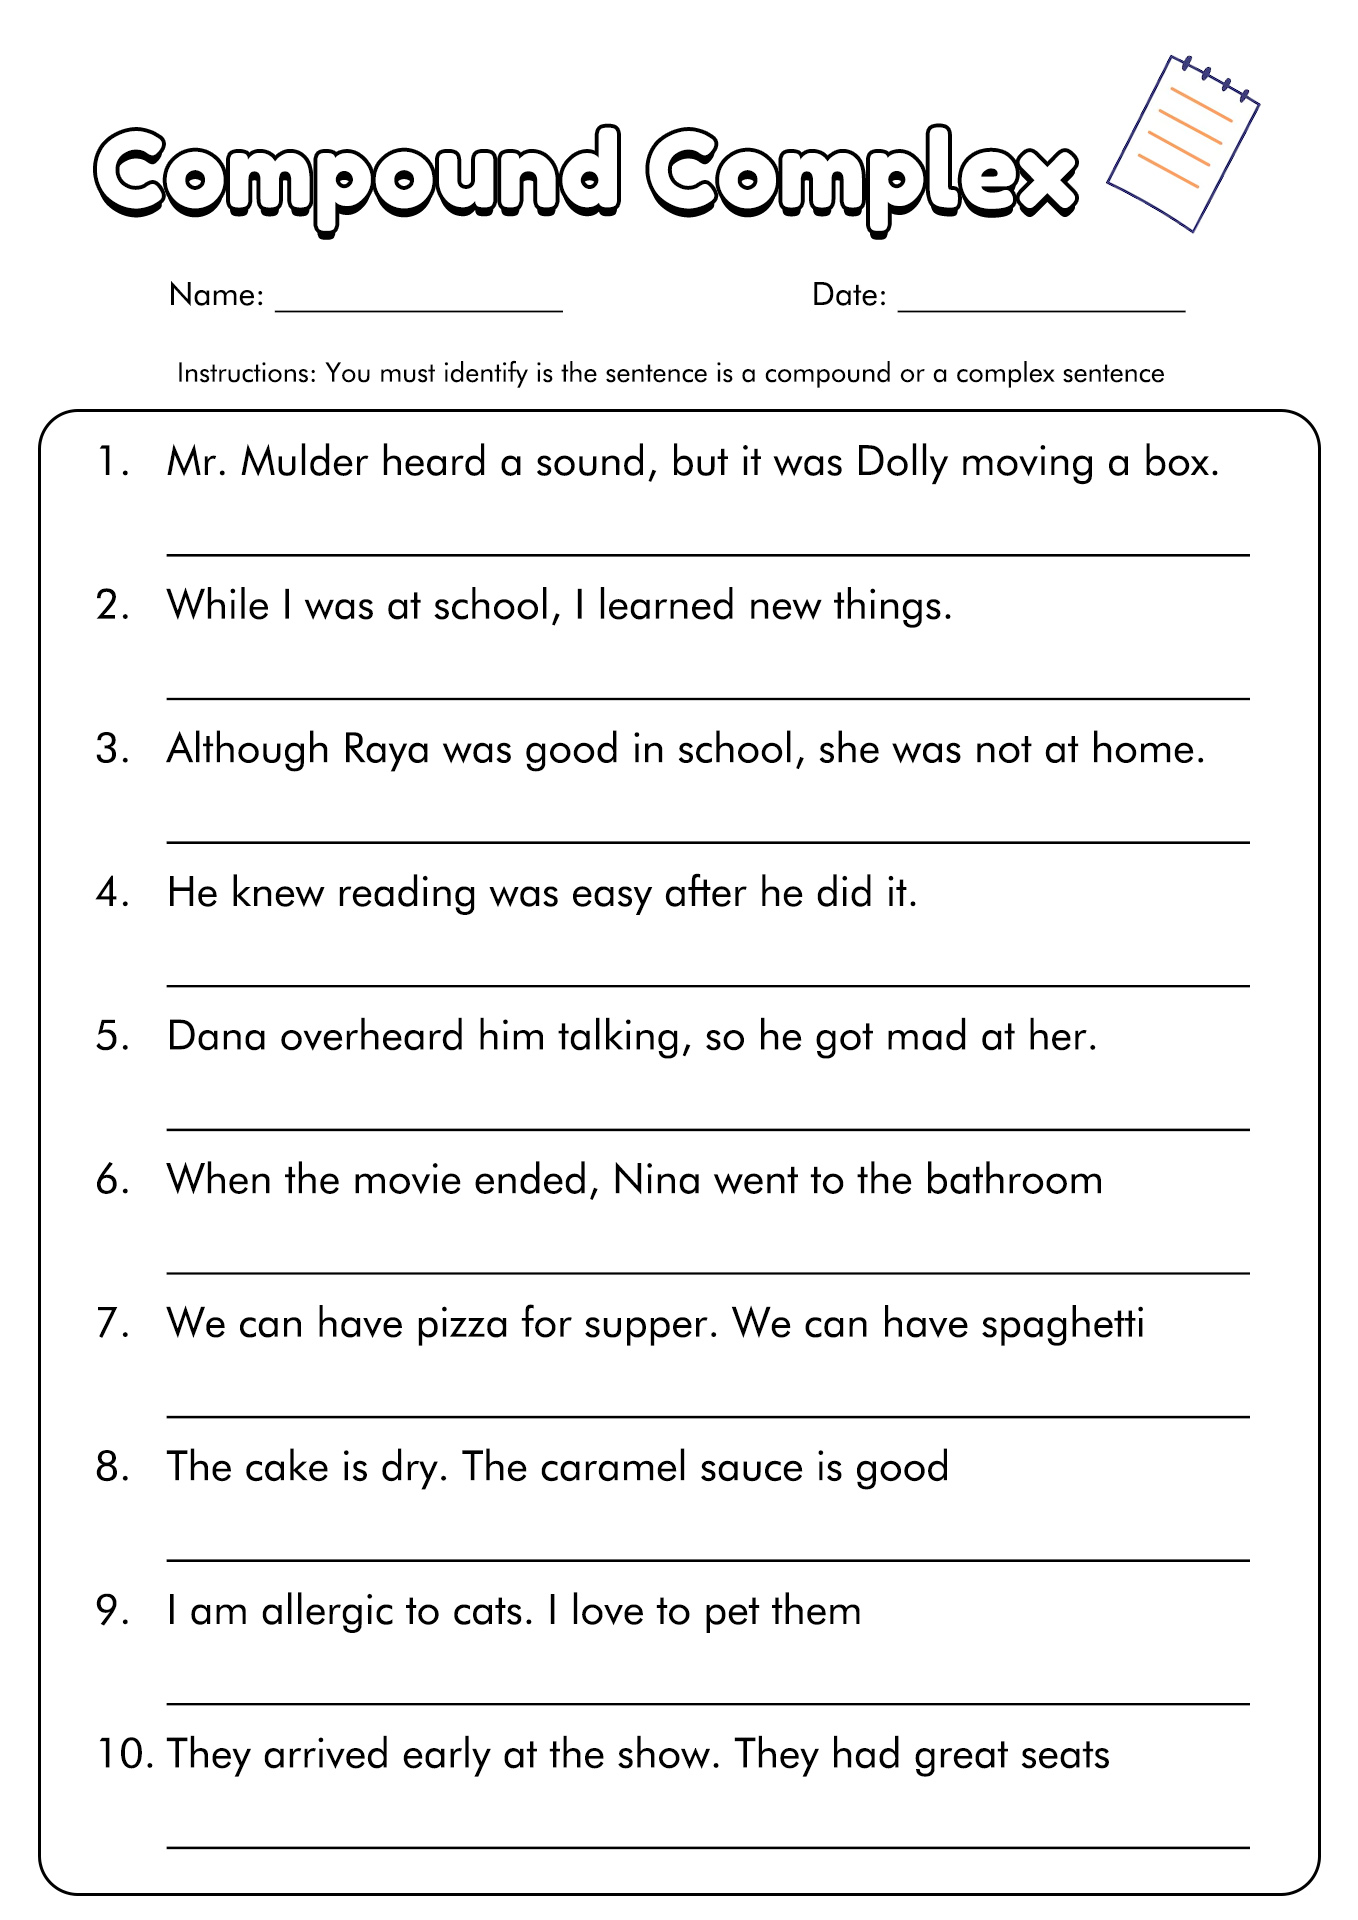 17-best-images-of-simple-sentence-worksheets-6th-grade-7th-grade